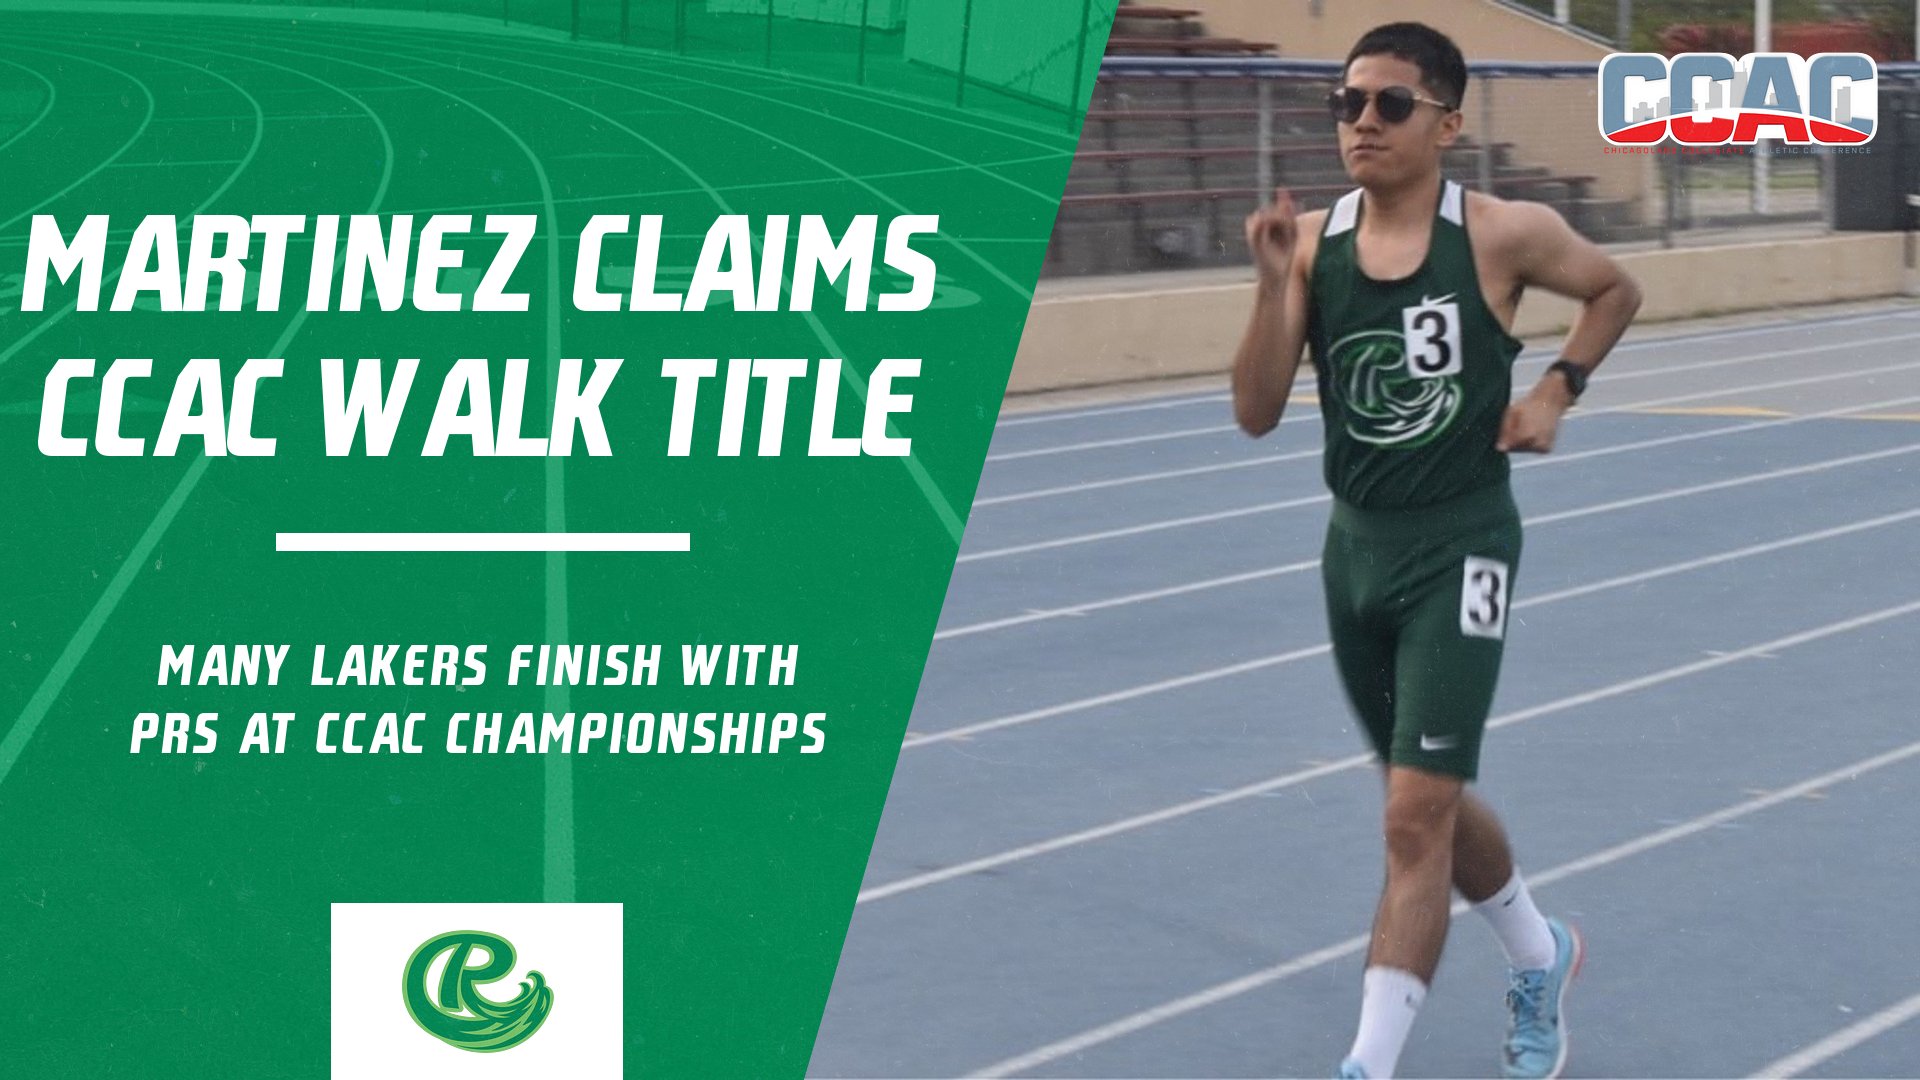 Martinez Qualifies For Nationals With CCAC Racewalk Victory